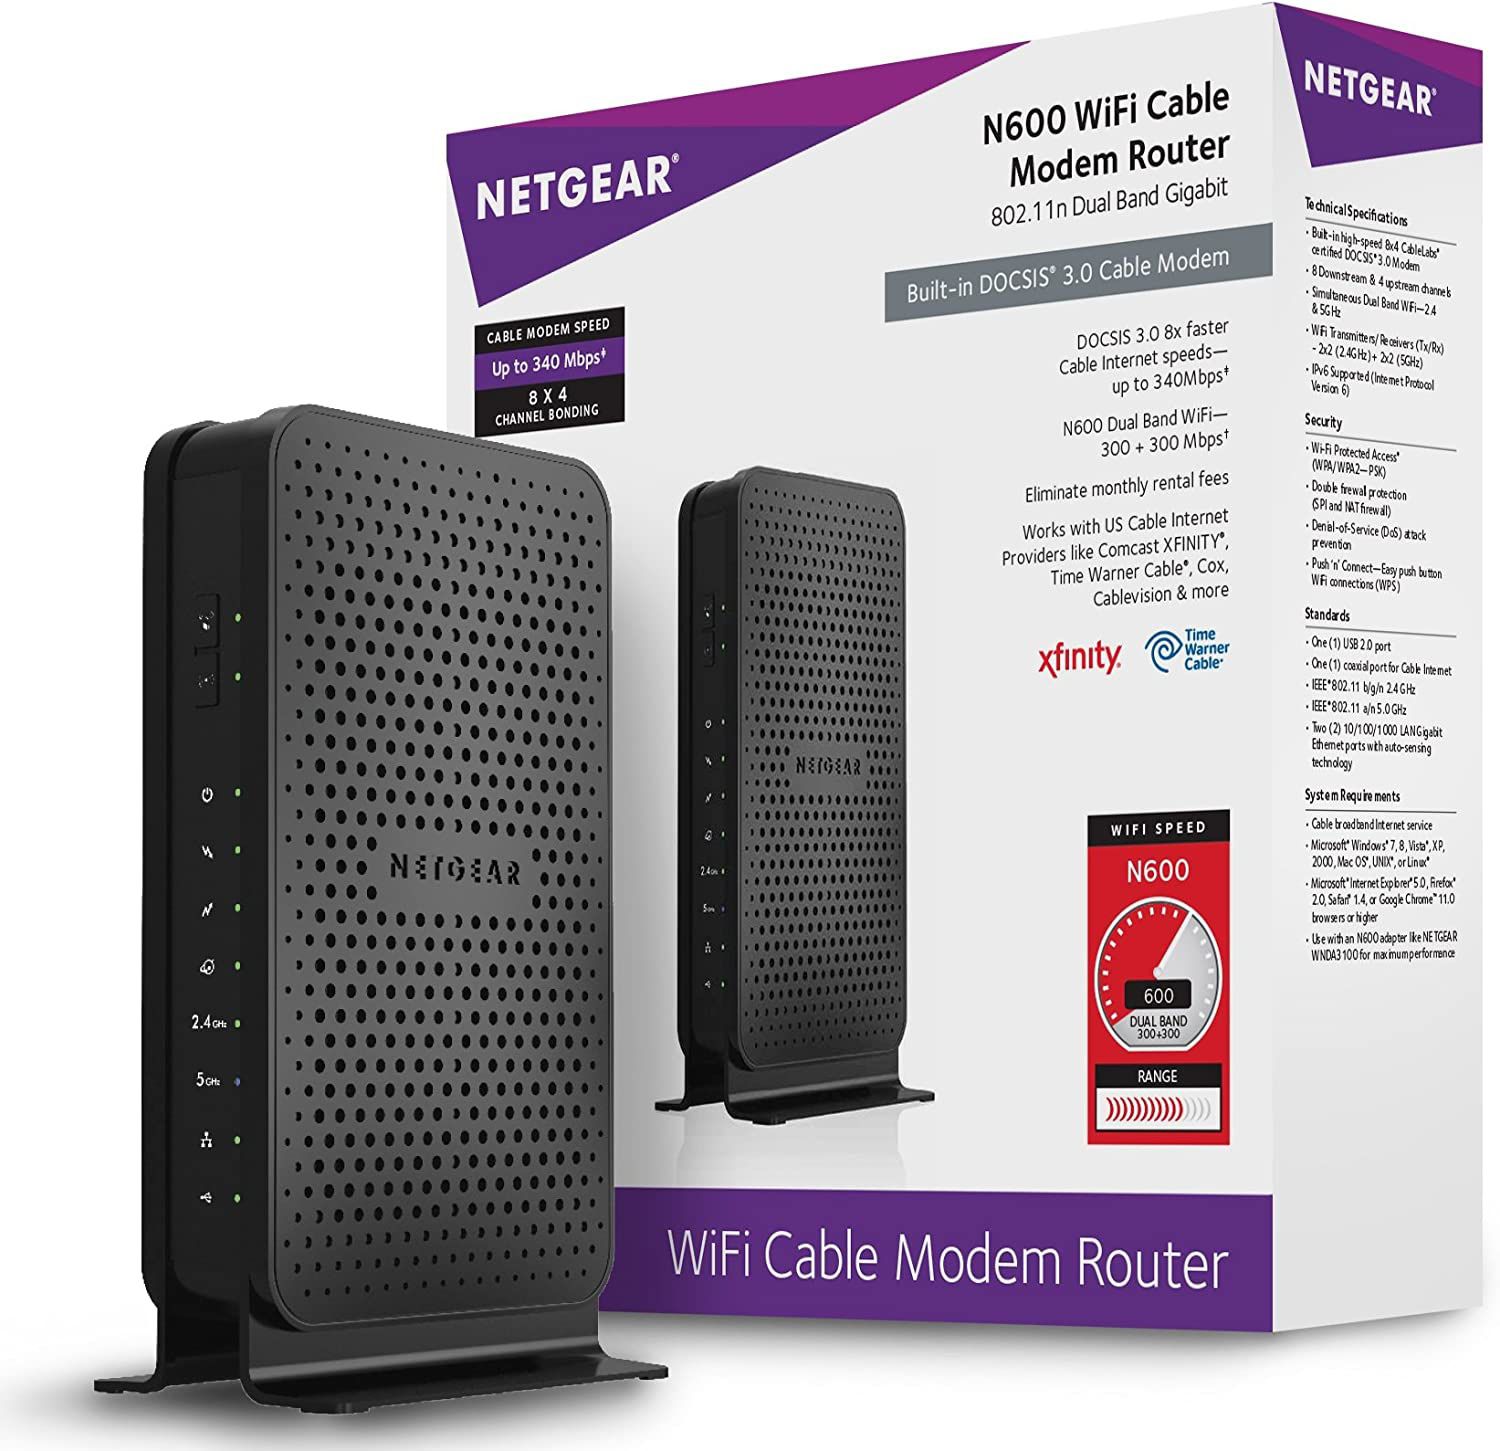 NETGEAR N600 (8x4) WiFi DOCSIS 3.0 Cable Modem Router (C3700) Certified for Xfinity from Comcast, Spectrum, Cox